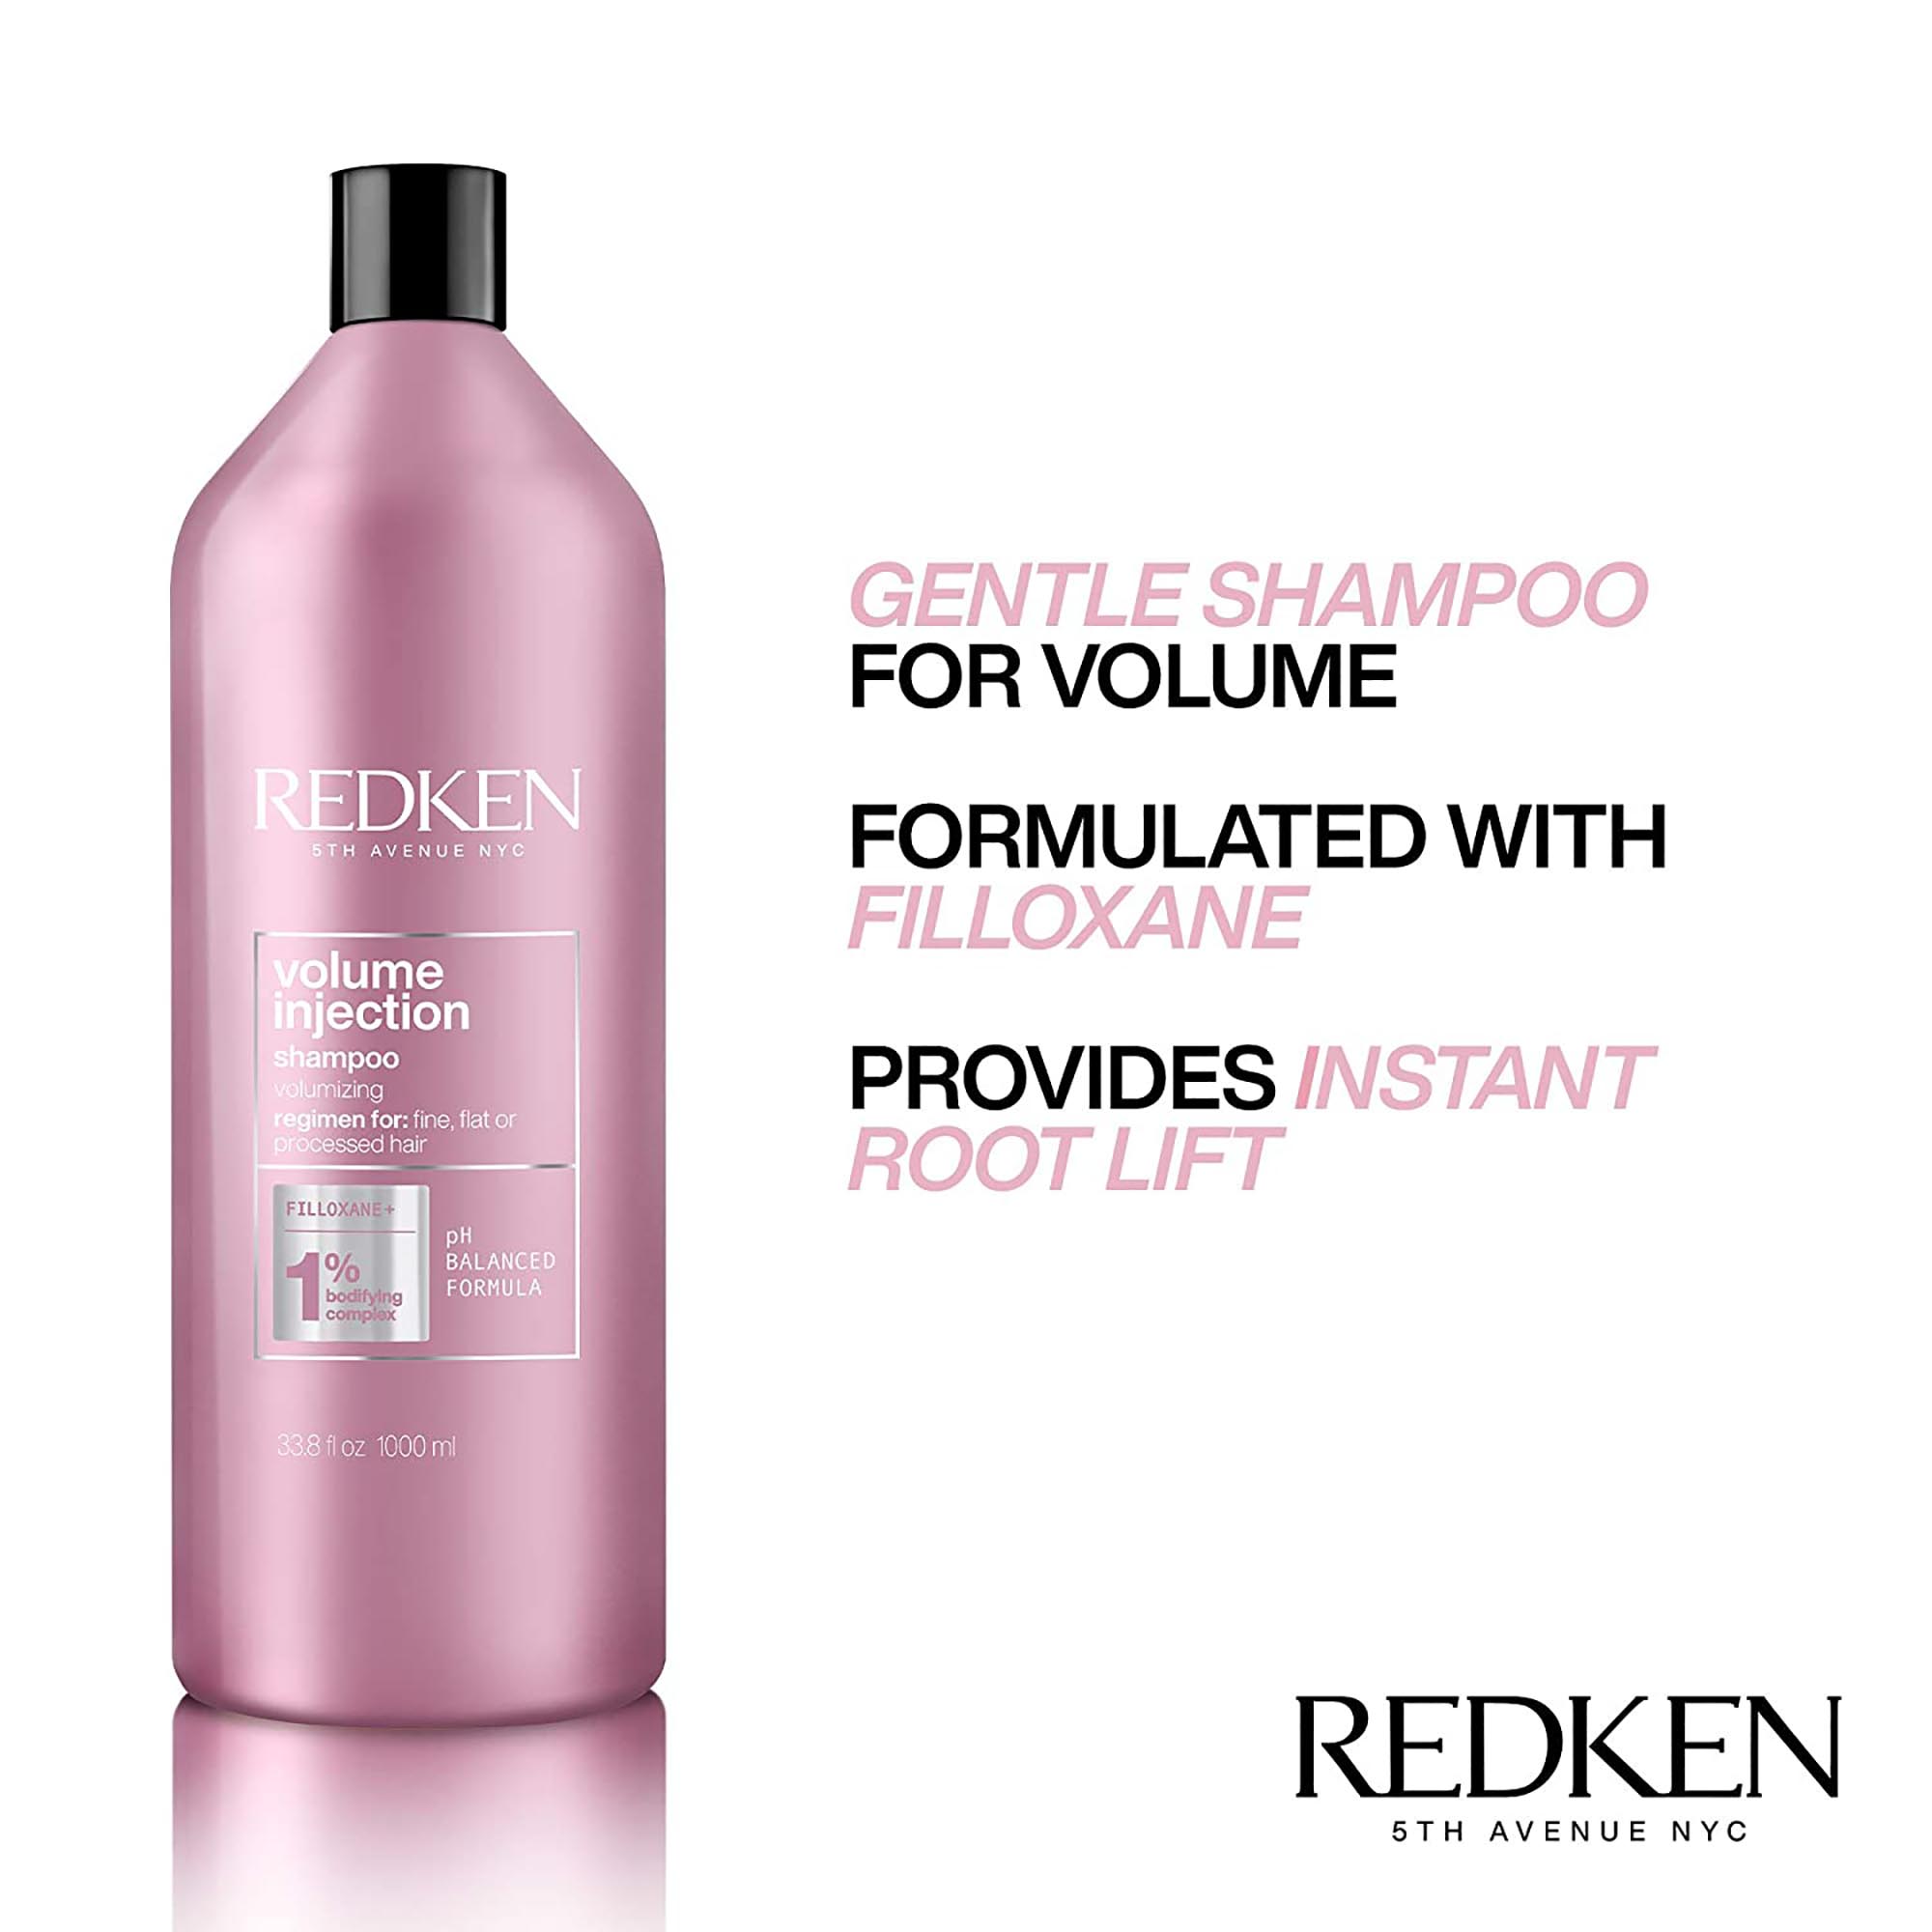 Redken Volume Injection Shampoo and Conditioner Liter Duo ($100 Value) / LITER